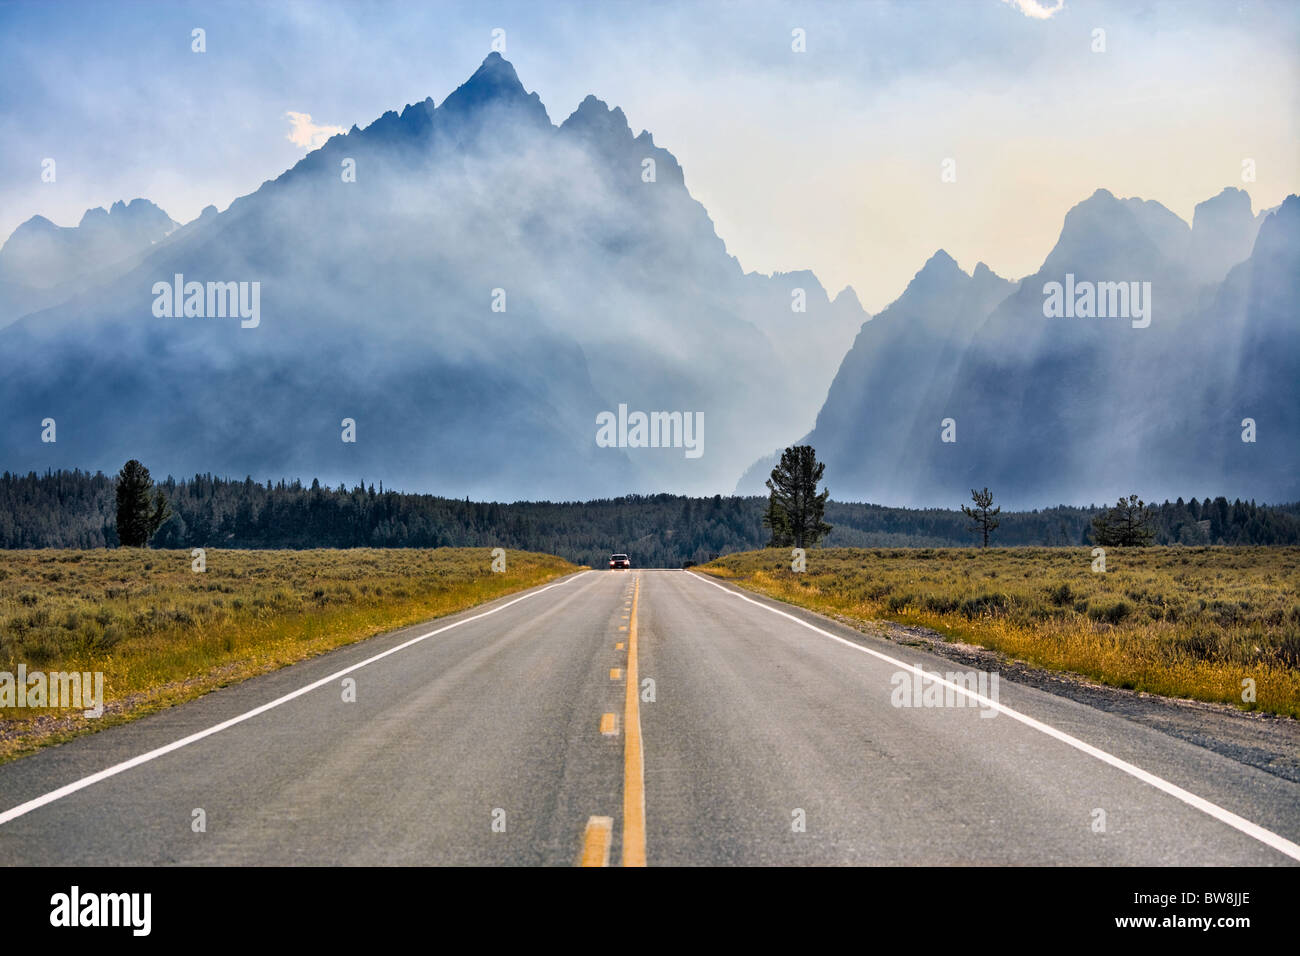 Mount Teton in Grand Teton National Park Wyoming. Jenny Lake Loop Road Scenic byway. Smoke from controlled fires. Stock Photo